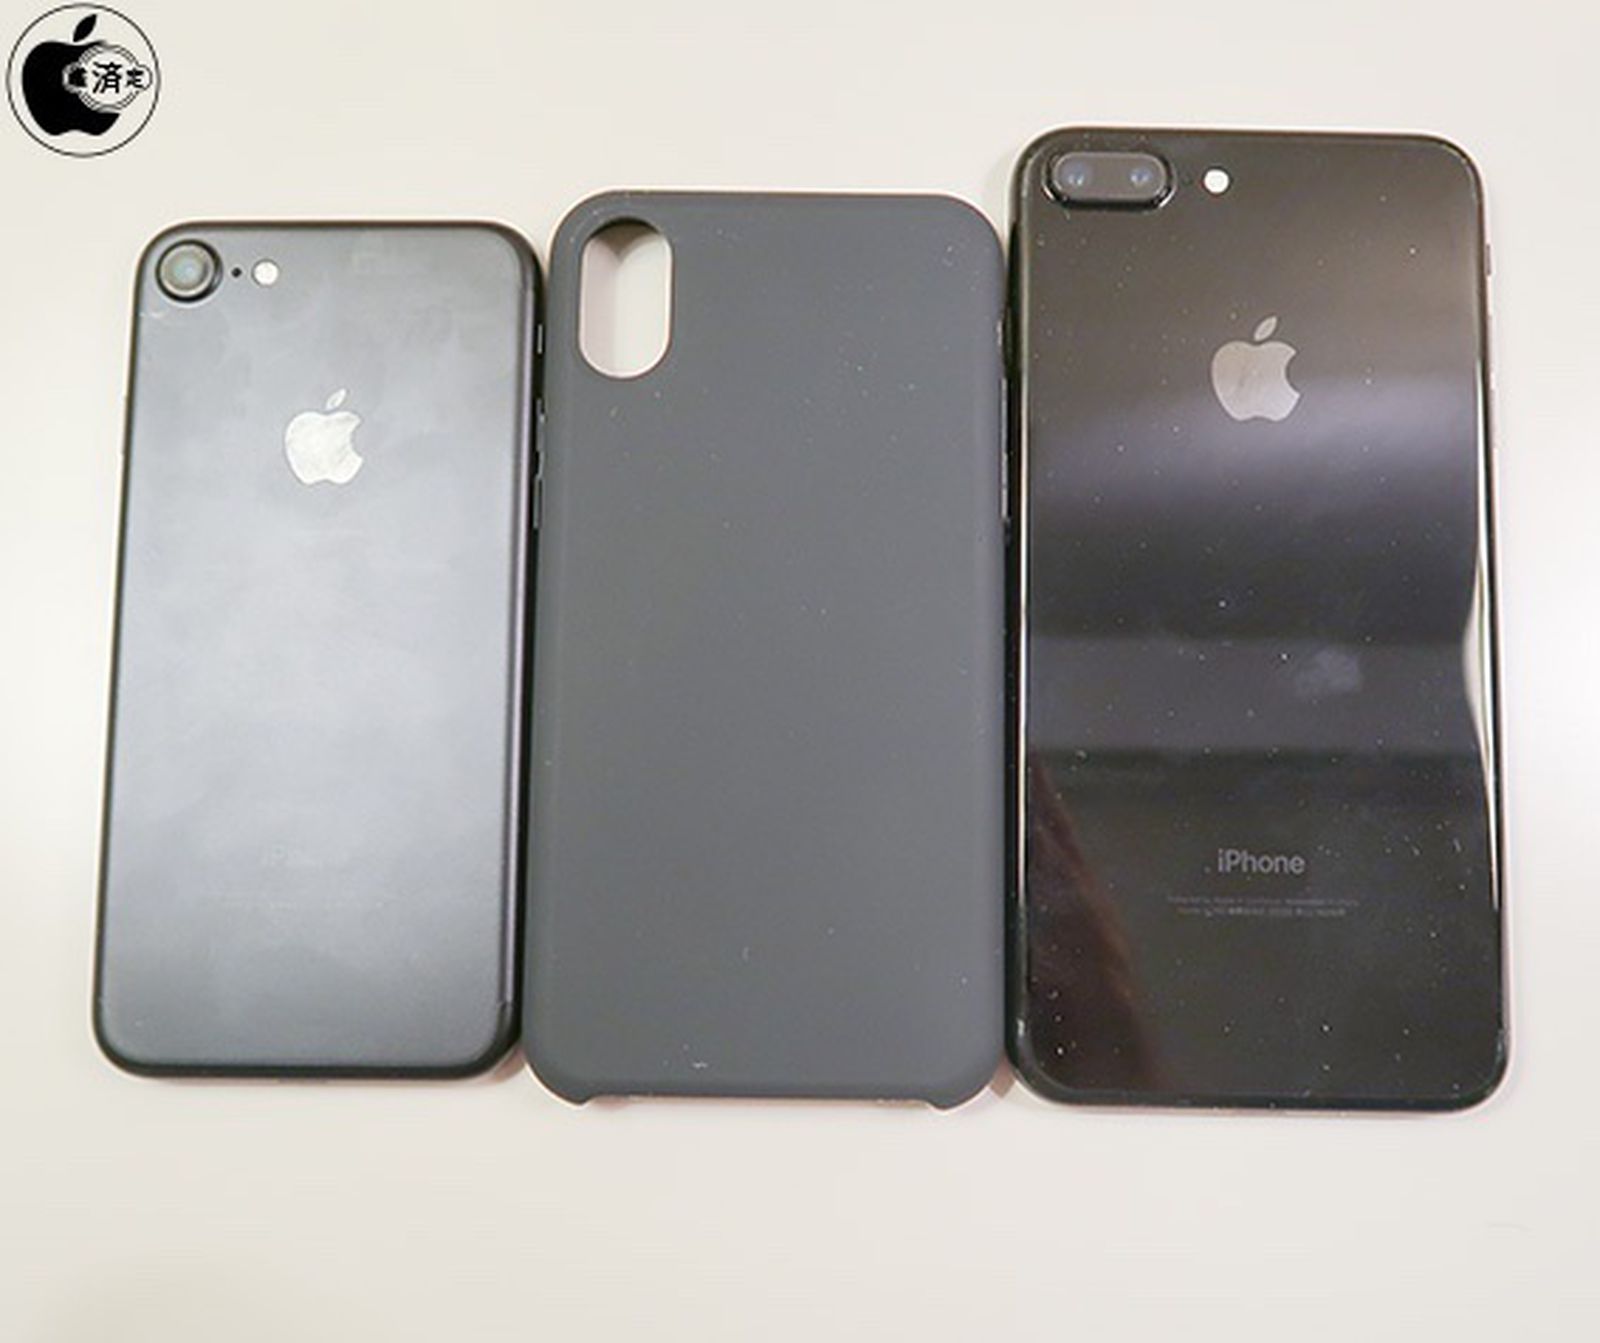 iPhone 8 Case Compared to iPhone 7 Offers Clear Picture of Size